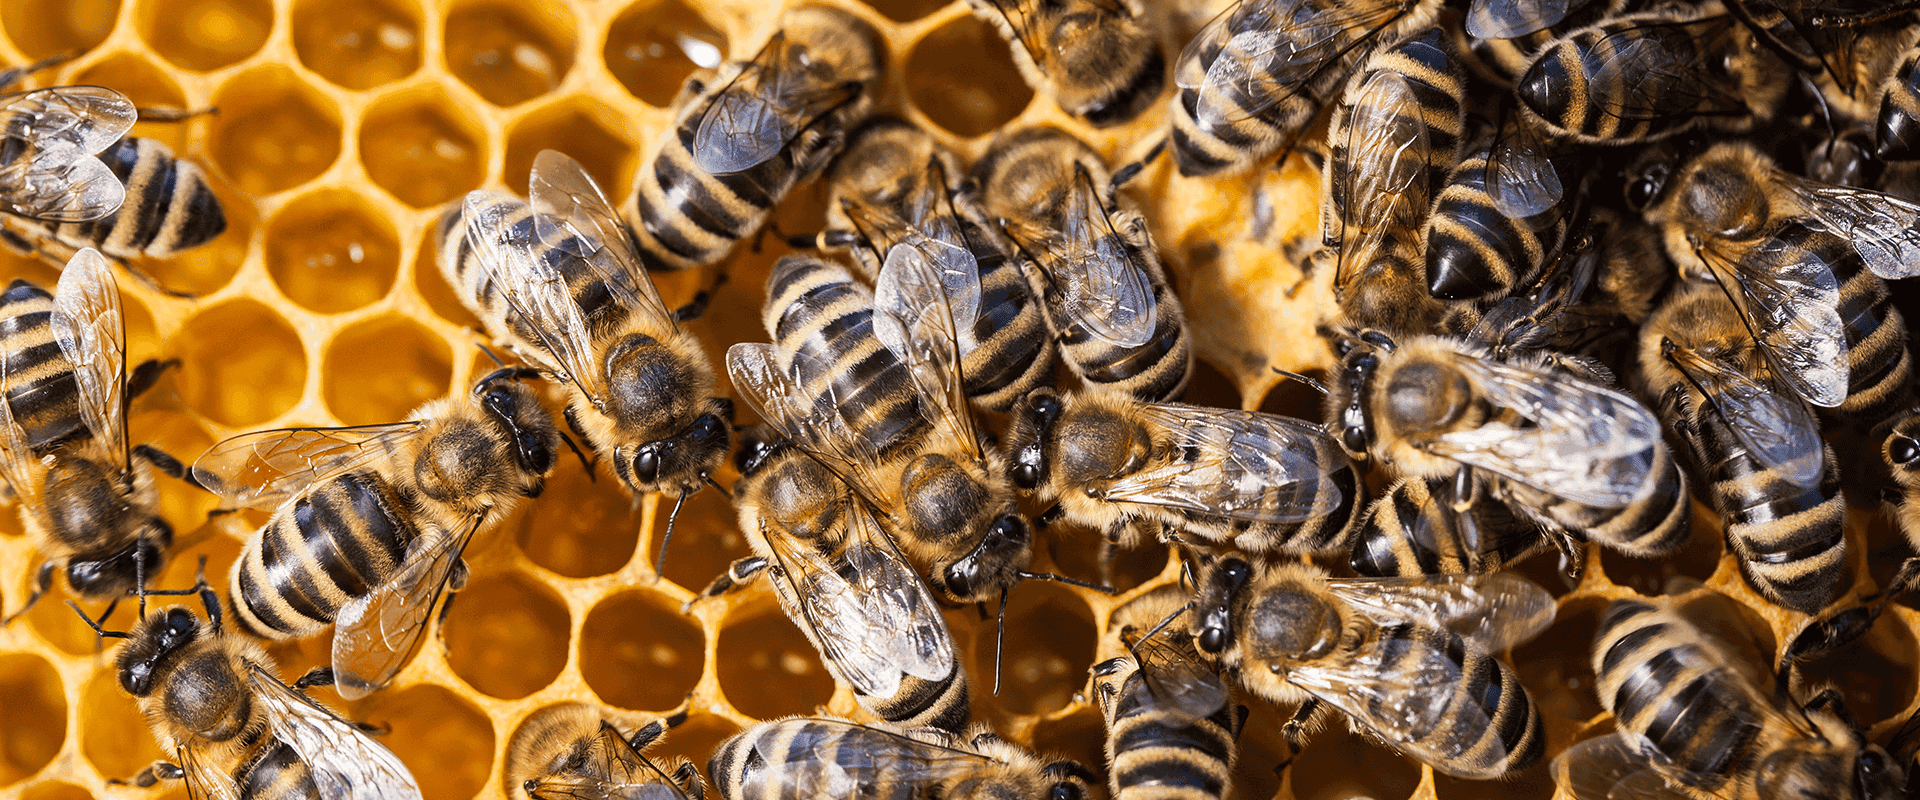 bees on nest